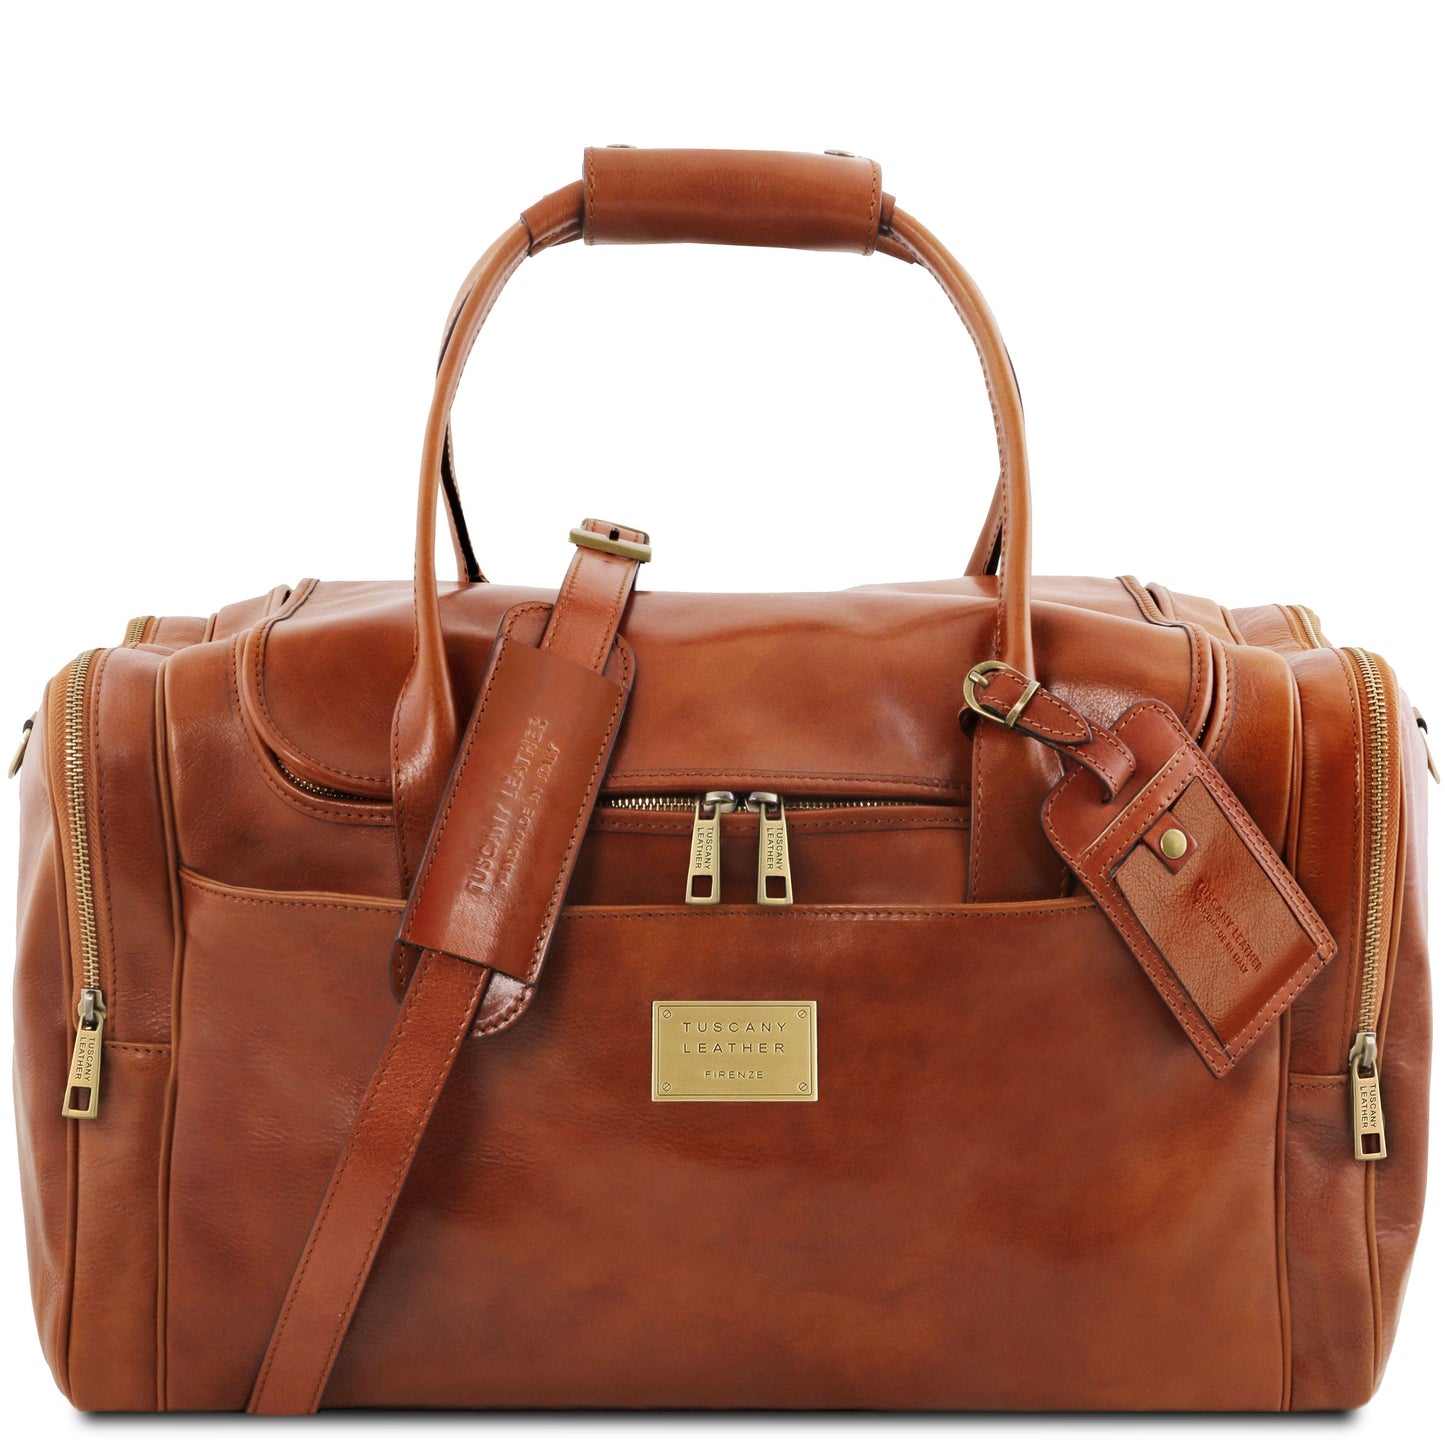 TL Voyager - Travel leather bag with side pockets | TL142141 - Premium Leather Travel bags - Shop now at San Rocco Italia